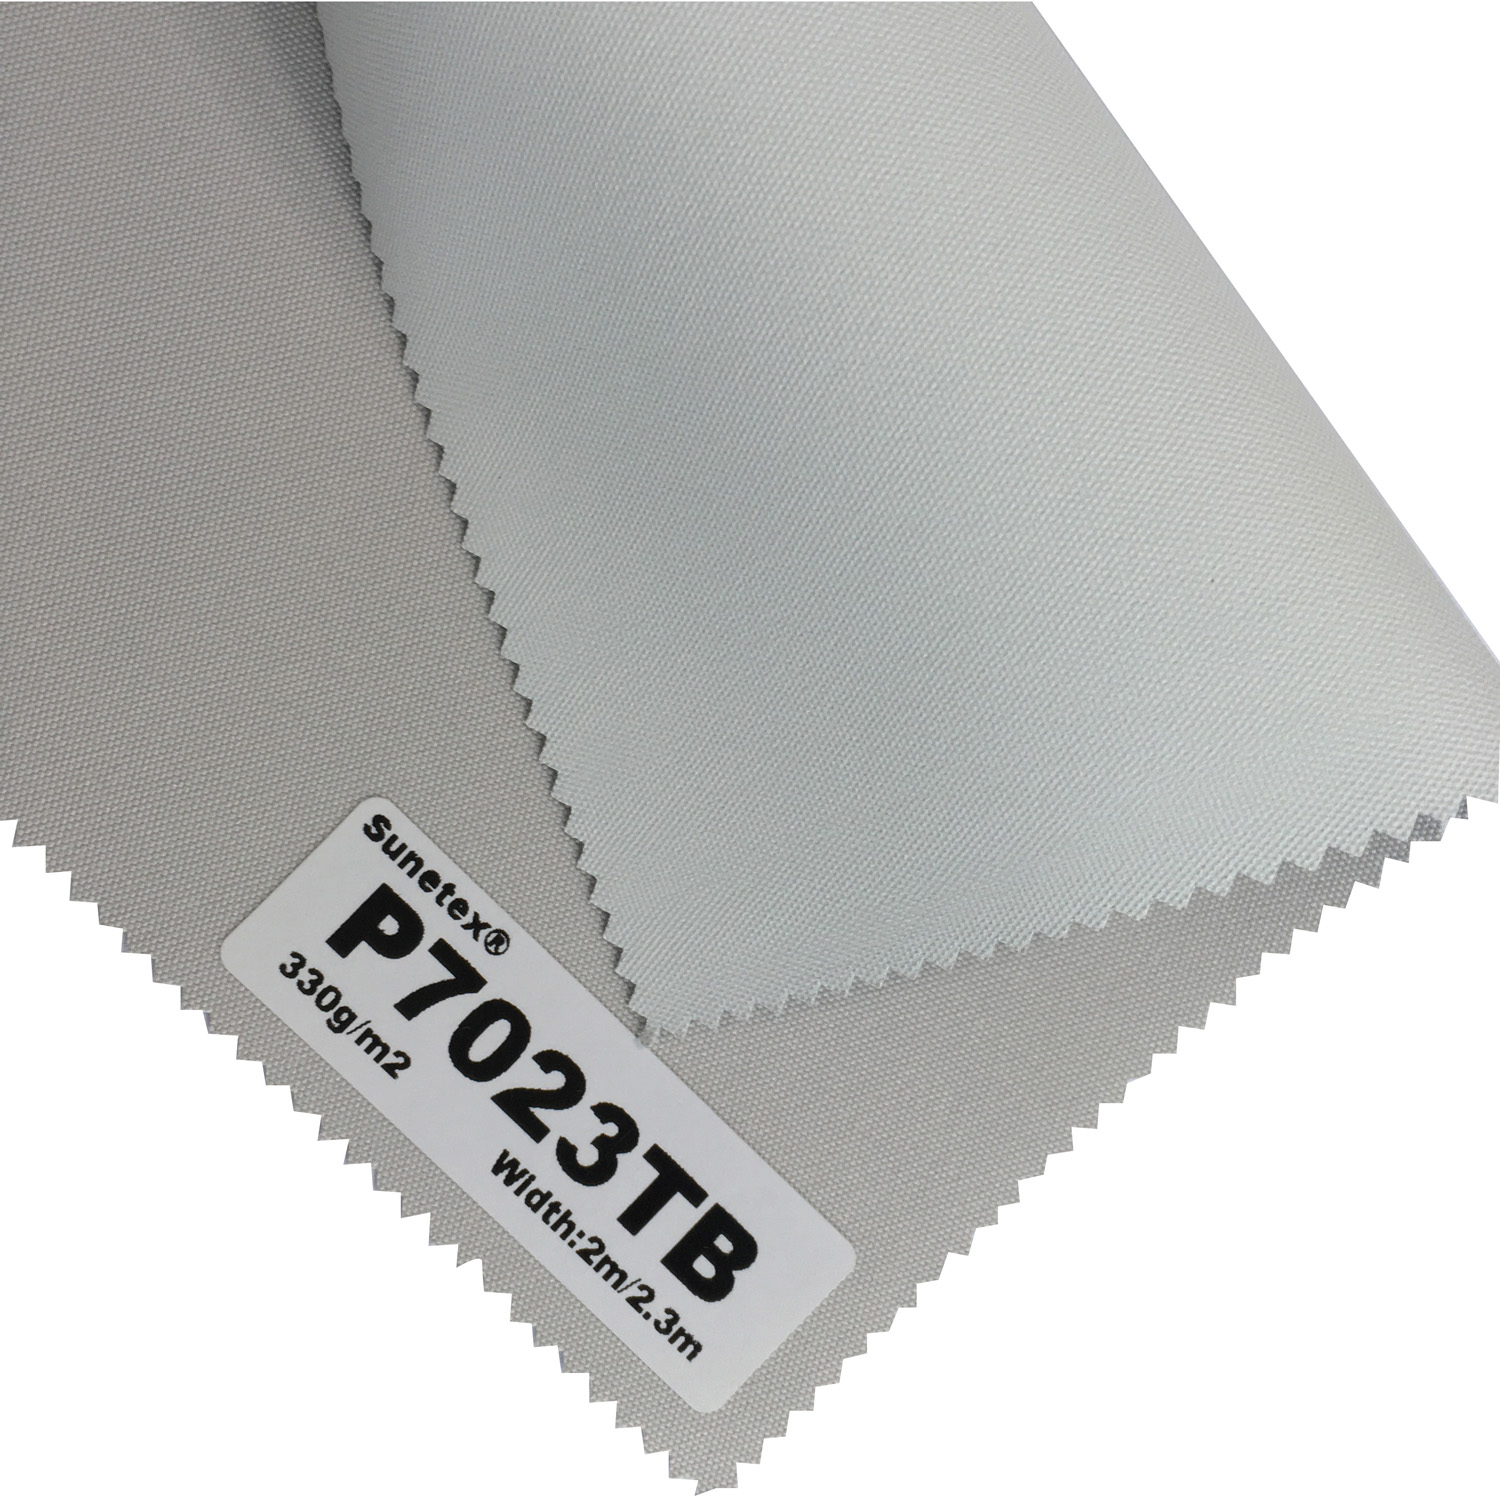 White Coated Roller Blackout Fabric